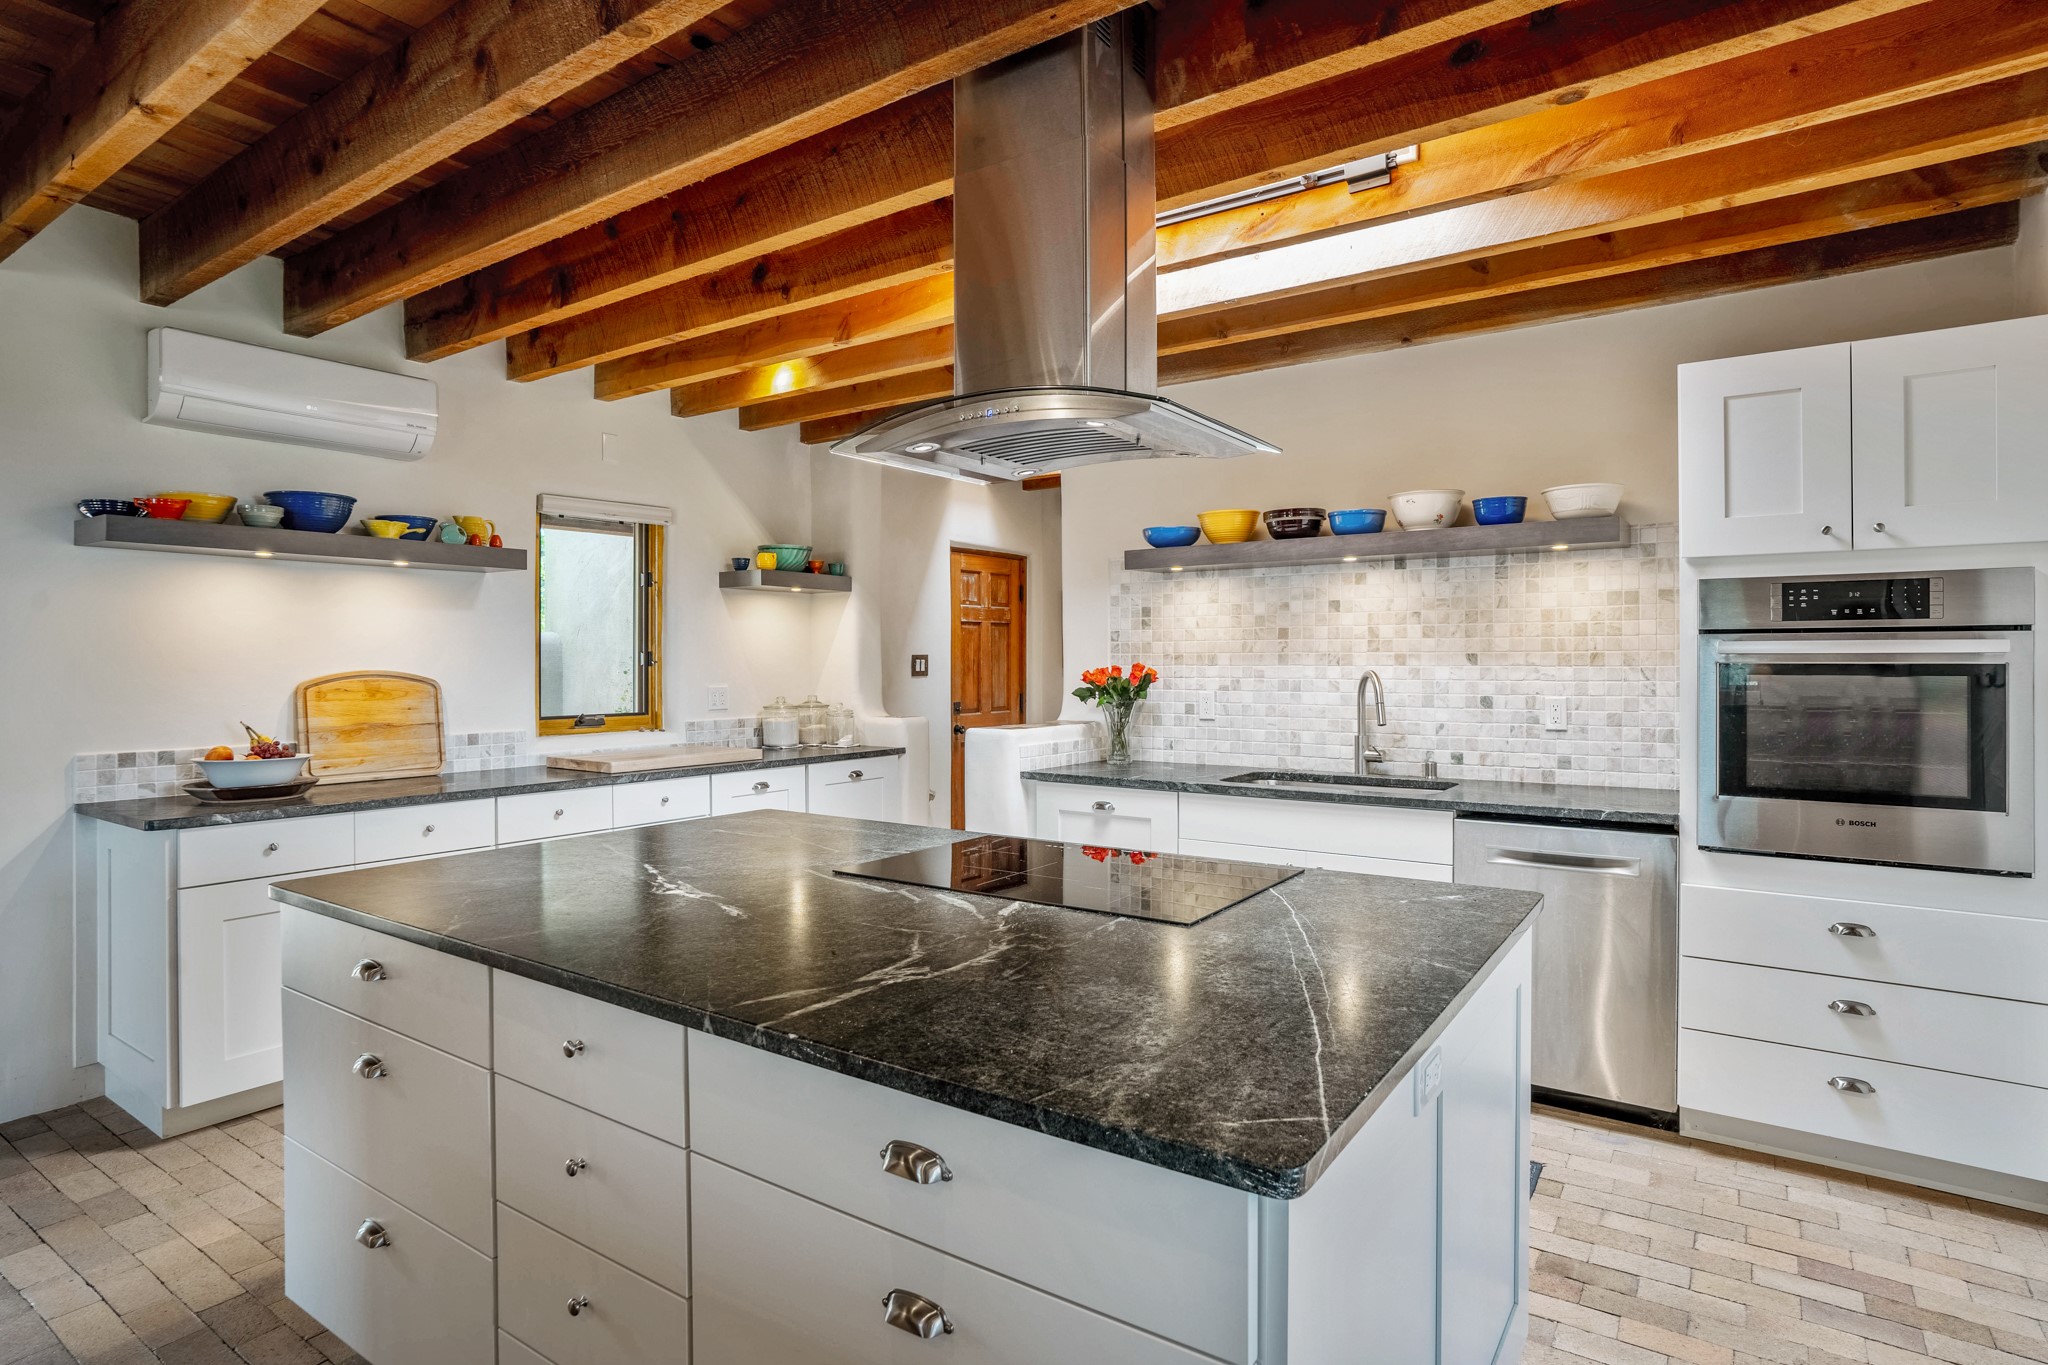 The kitchen was renovated in 2020. Soapstone countertops.